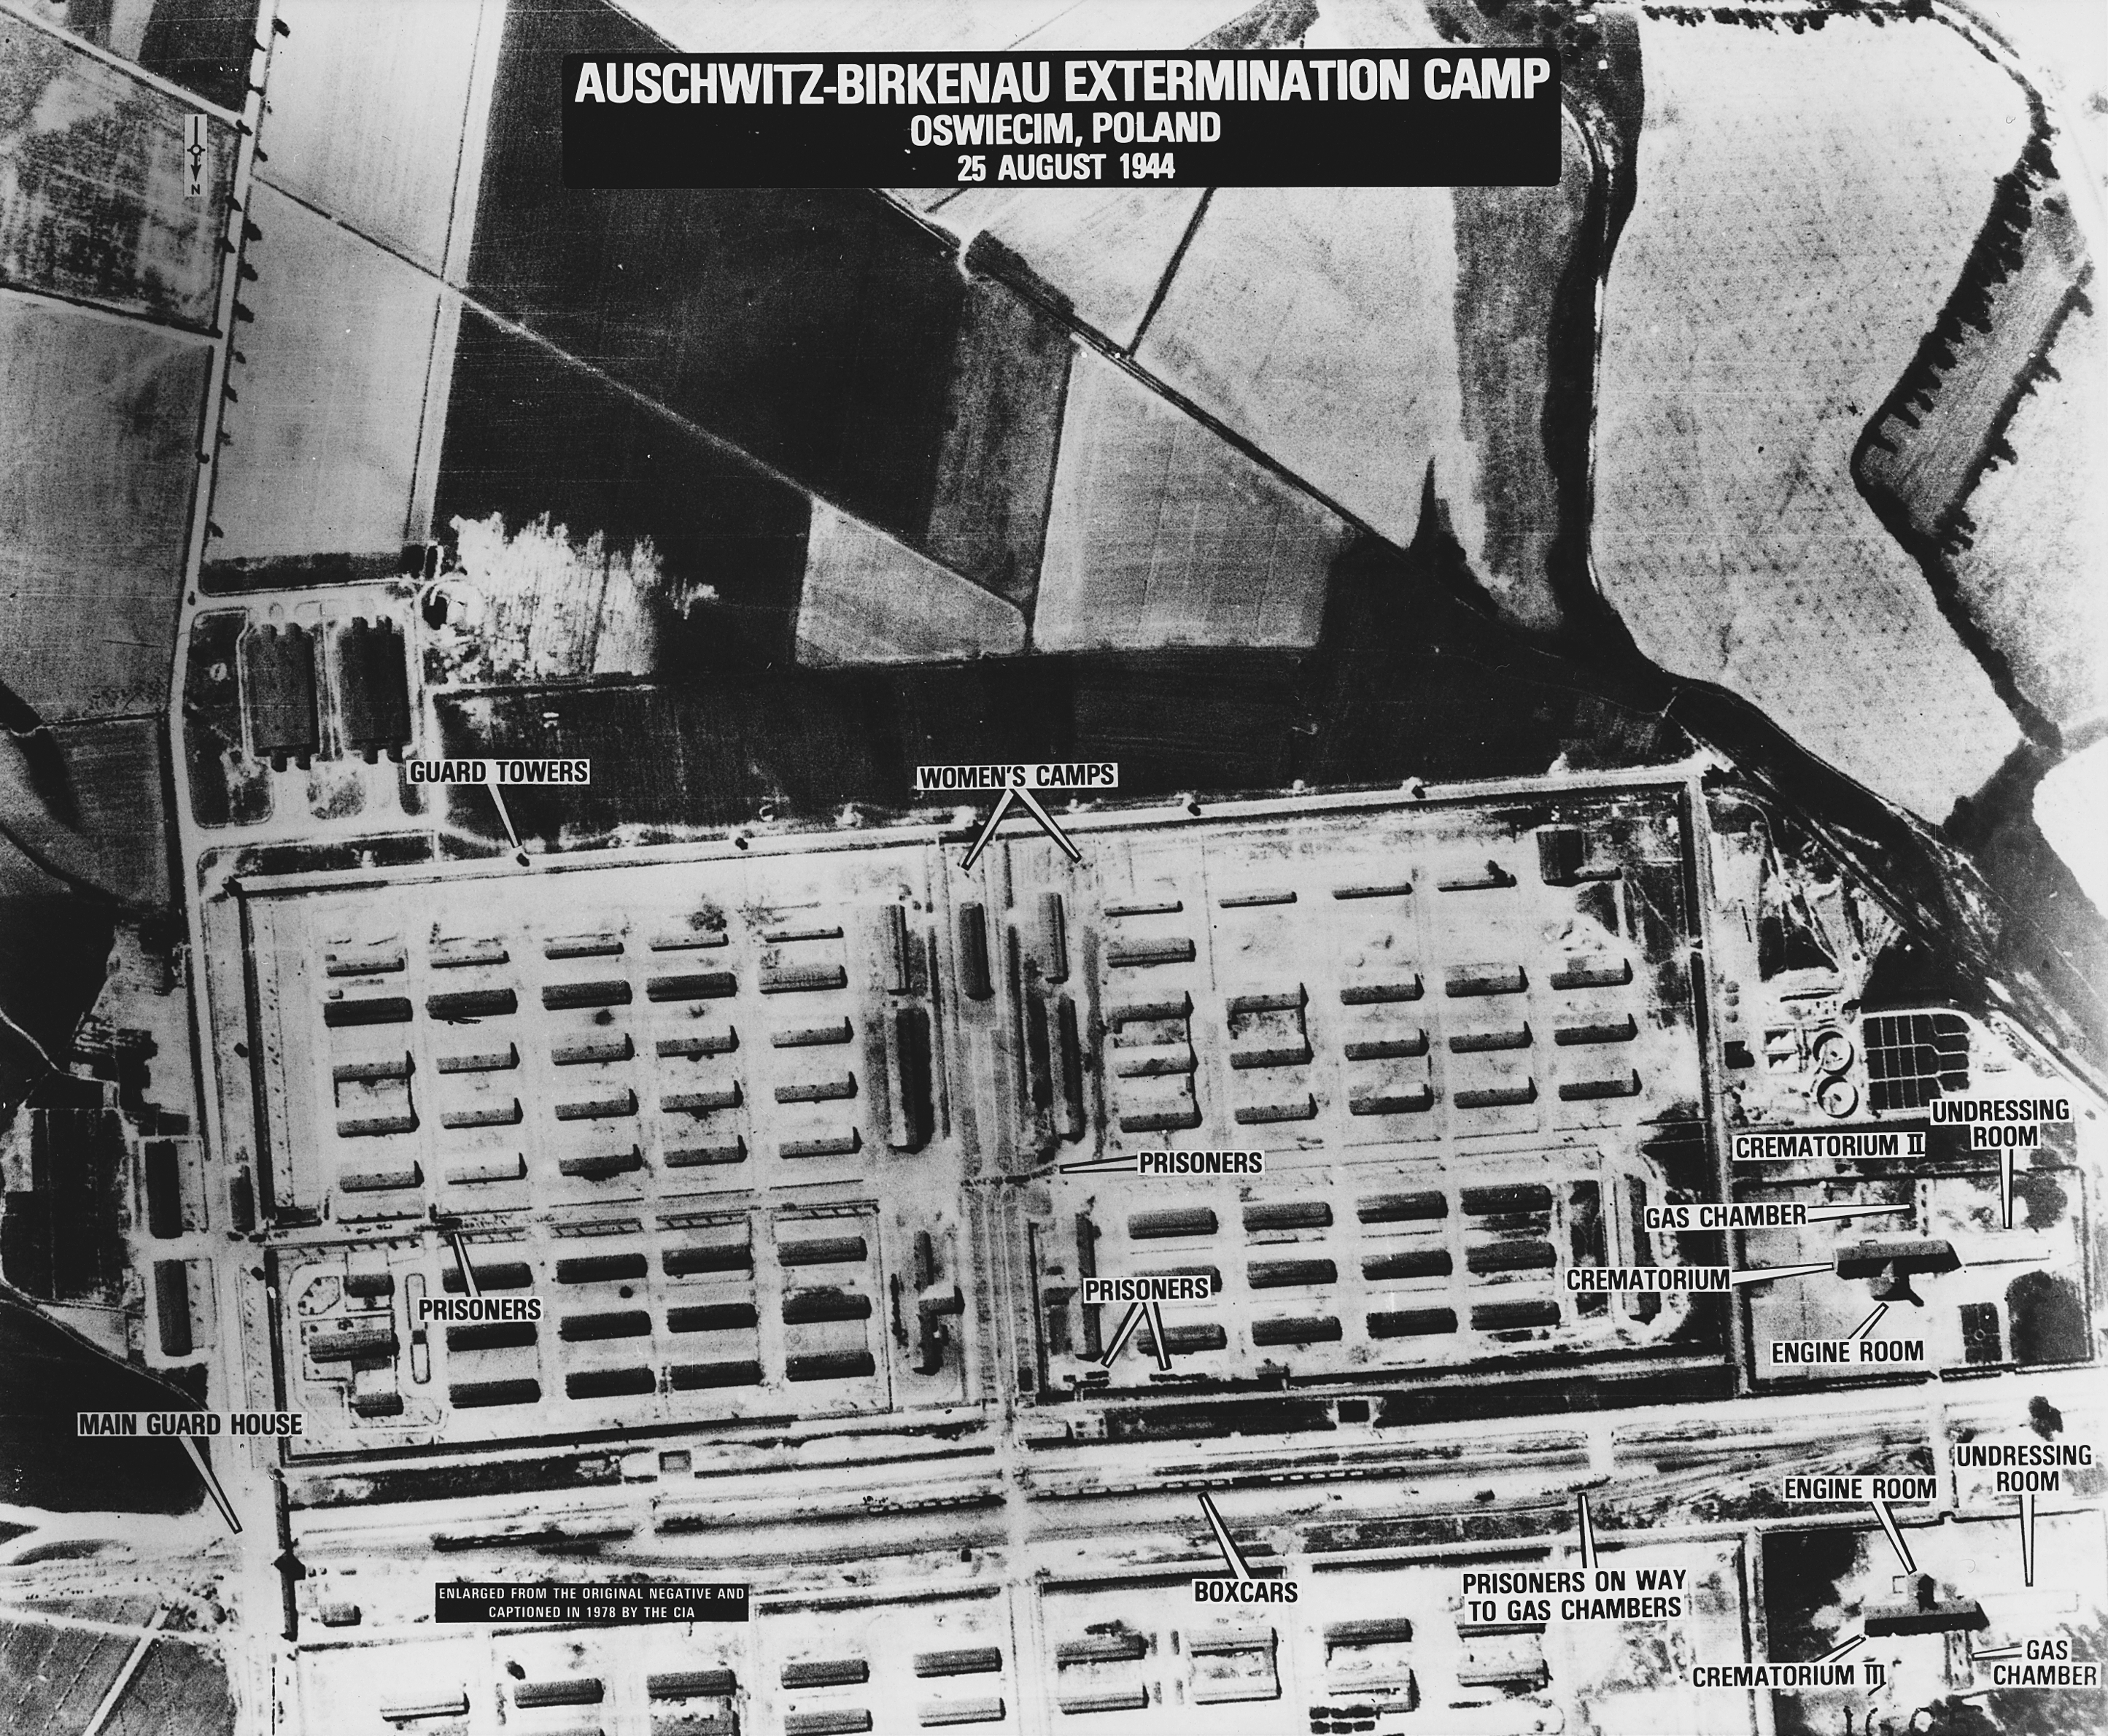 USAAF intelligence aerial photograph of the Auschwitz-Birkenau camp at Oświęcim, Poland taken 25 Aug 1944. This is a scan of an enlarged print taken from the original negative and captioned by the CIA in 1978.